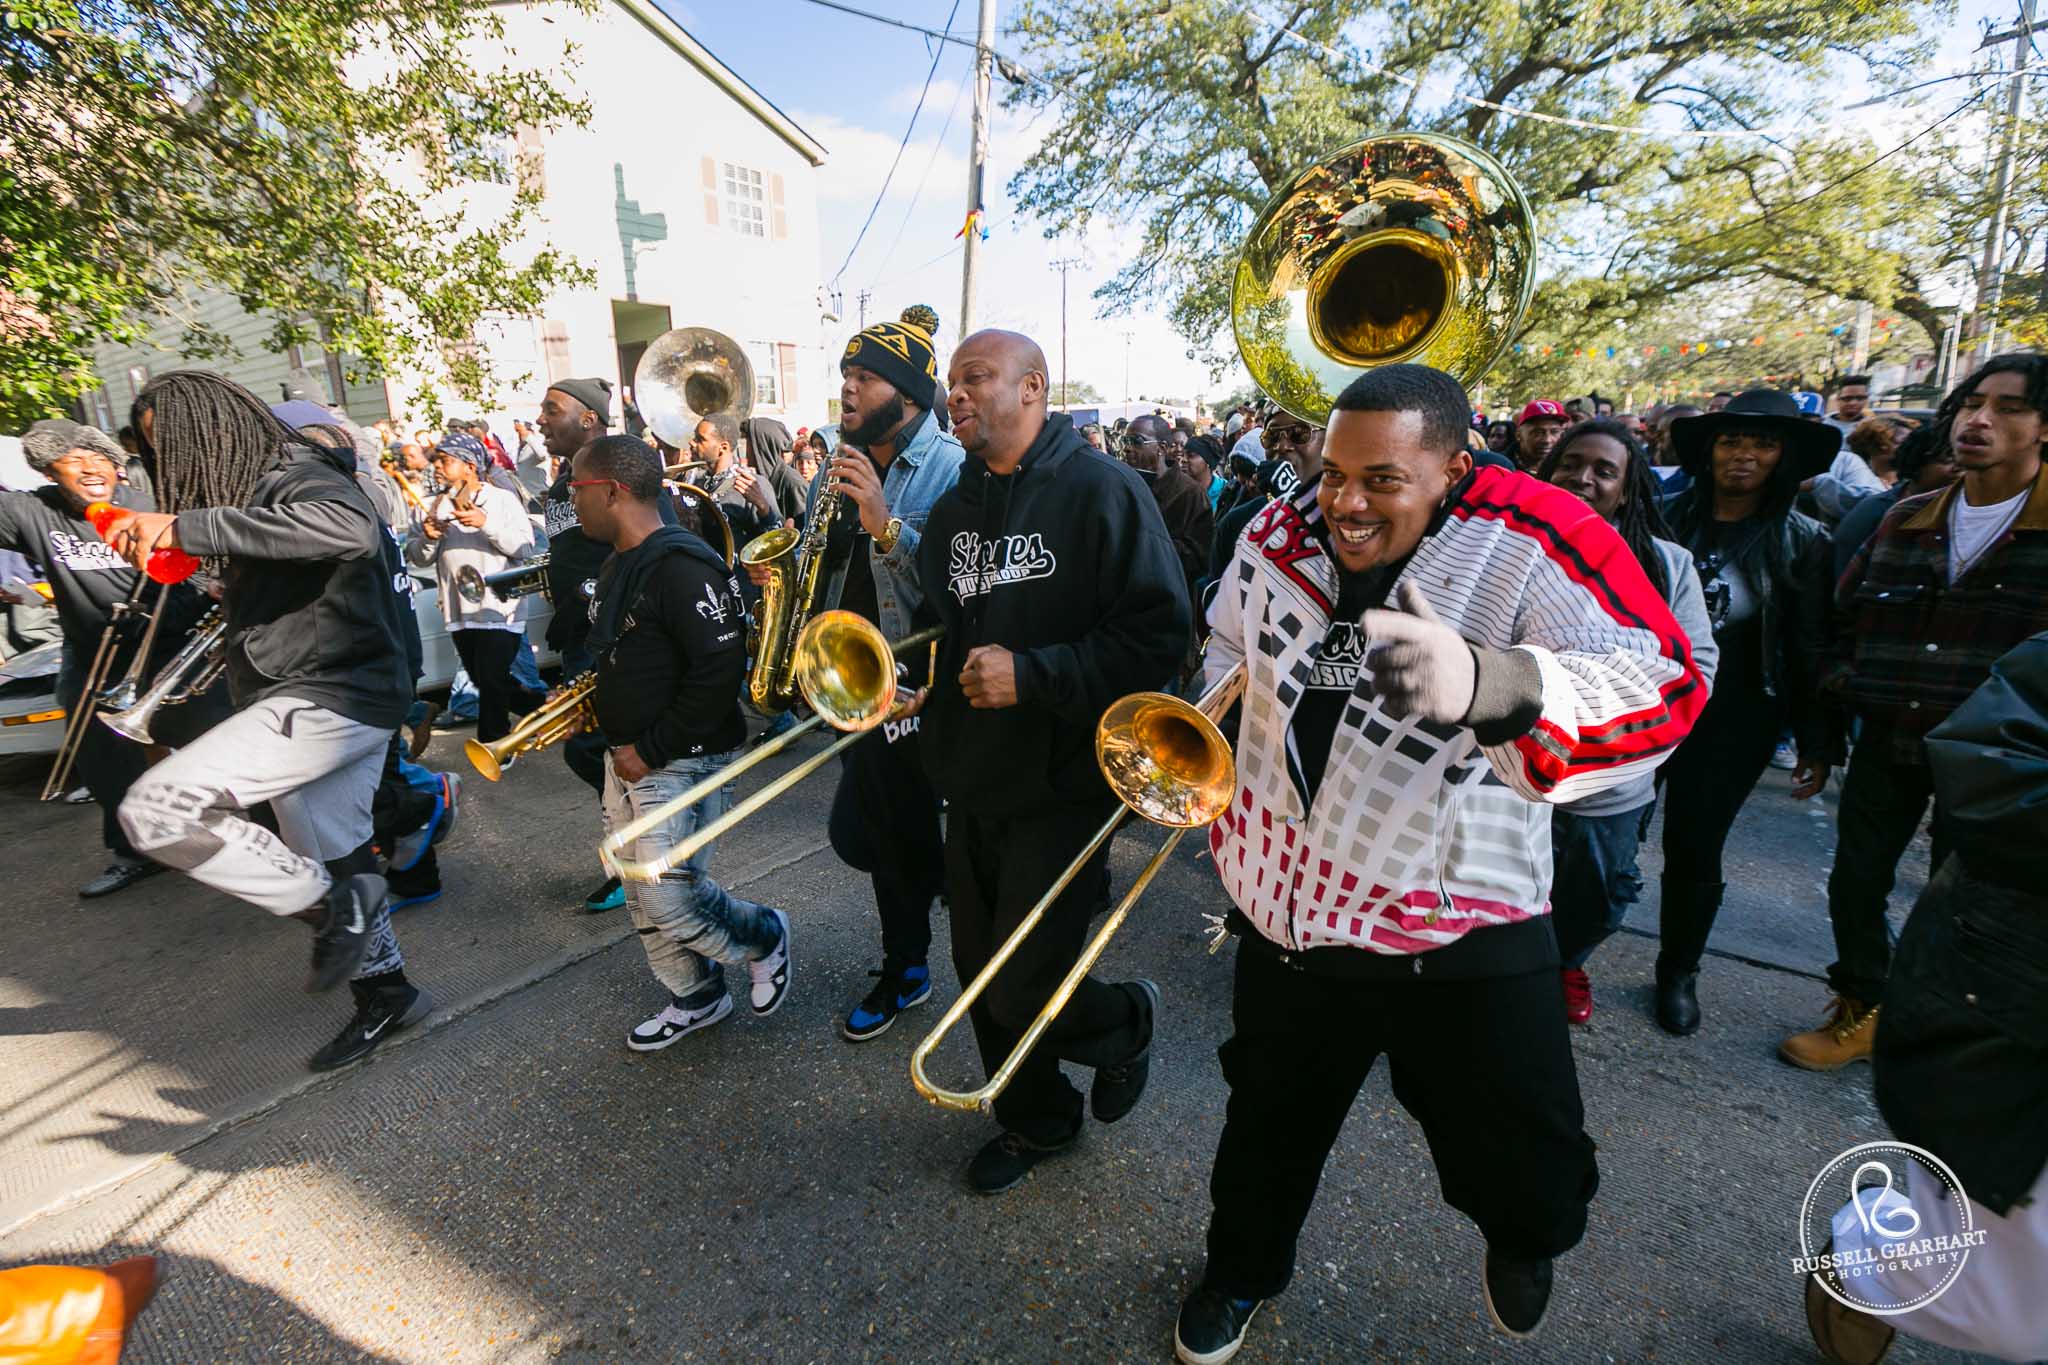 We tracked down the Lady Jetsetters second line parade.